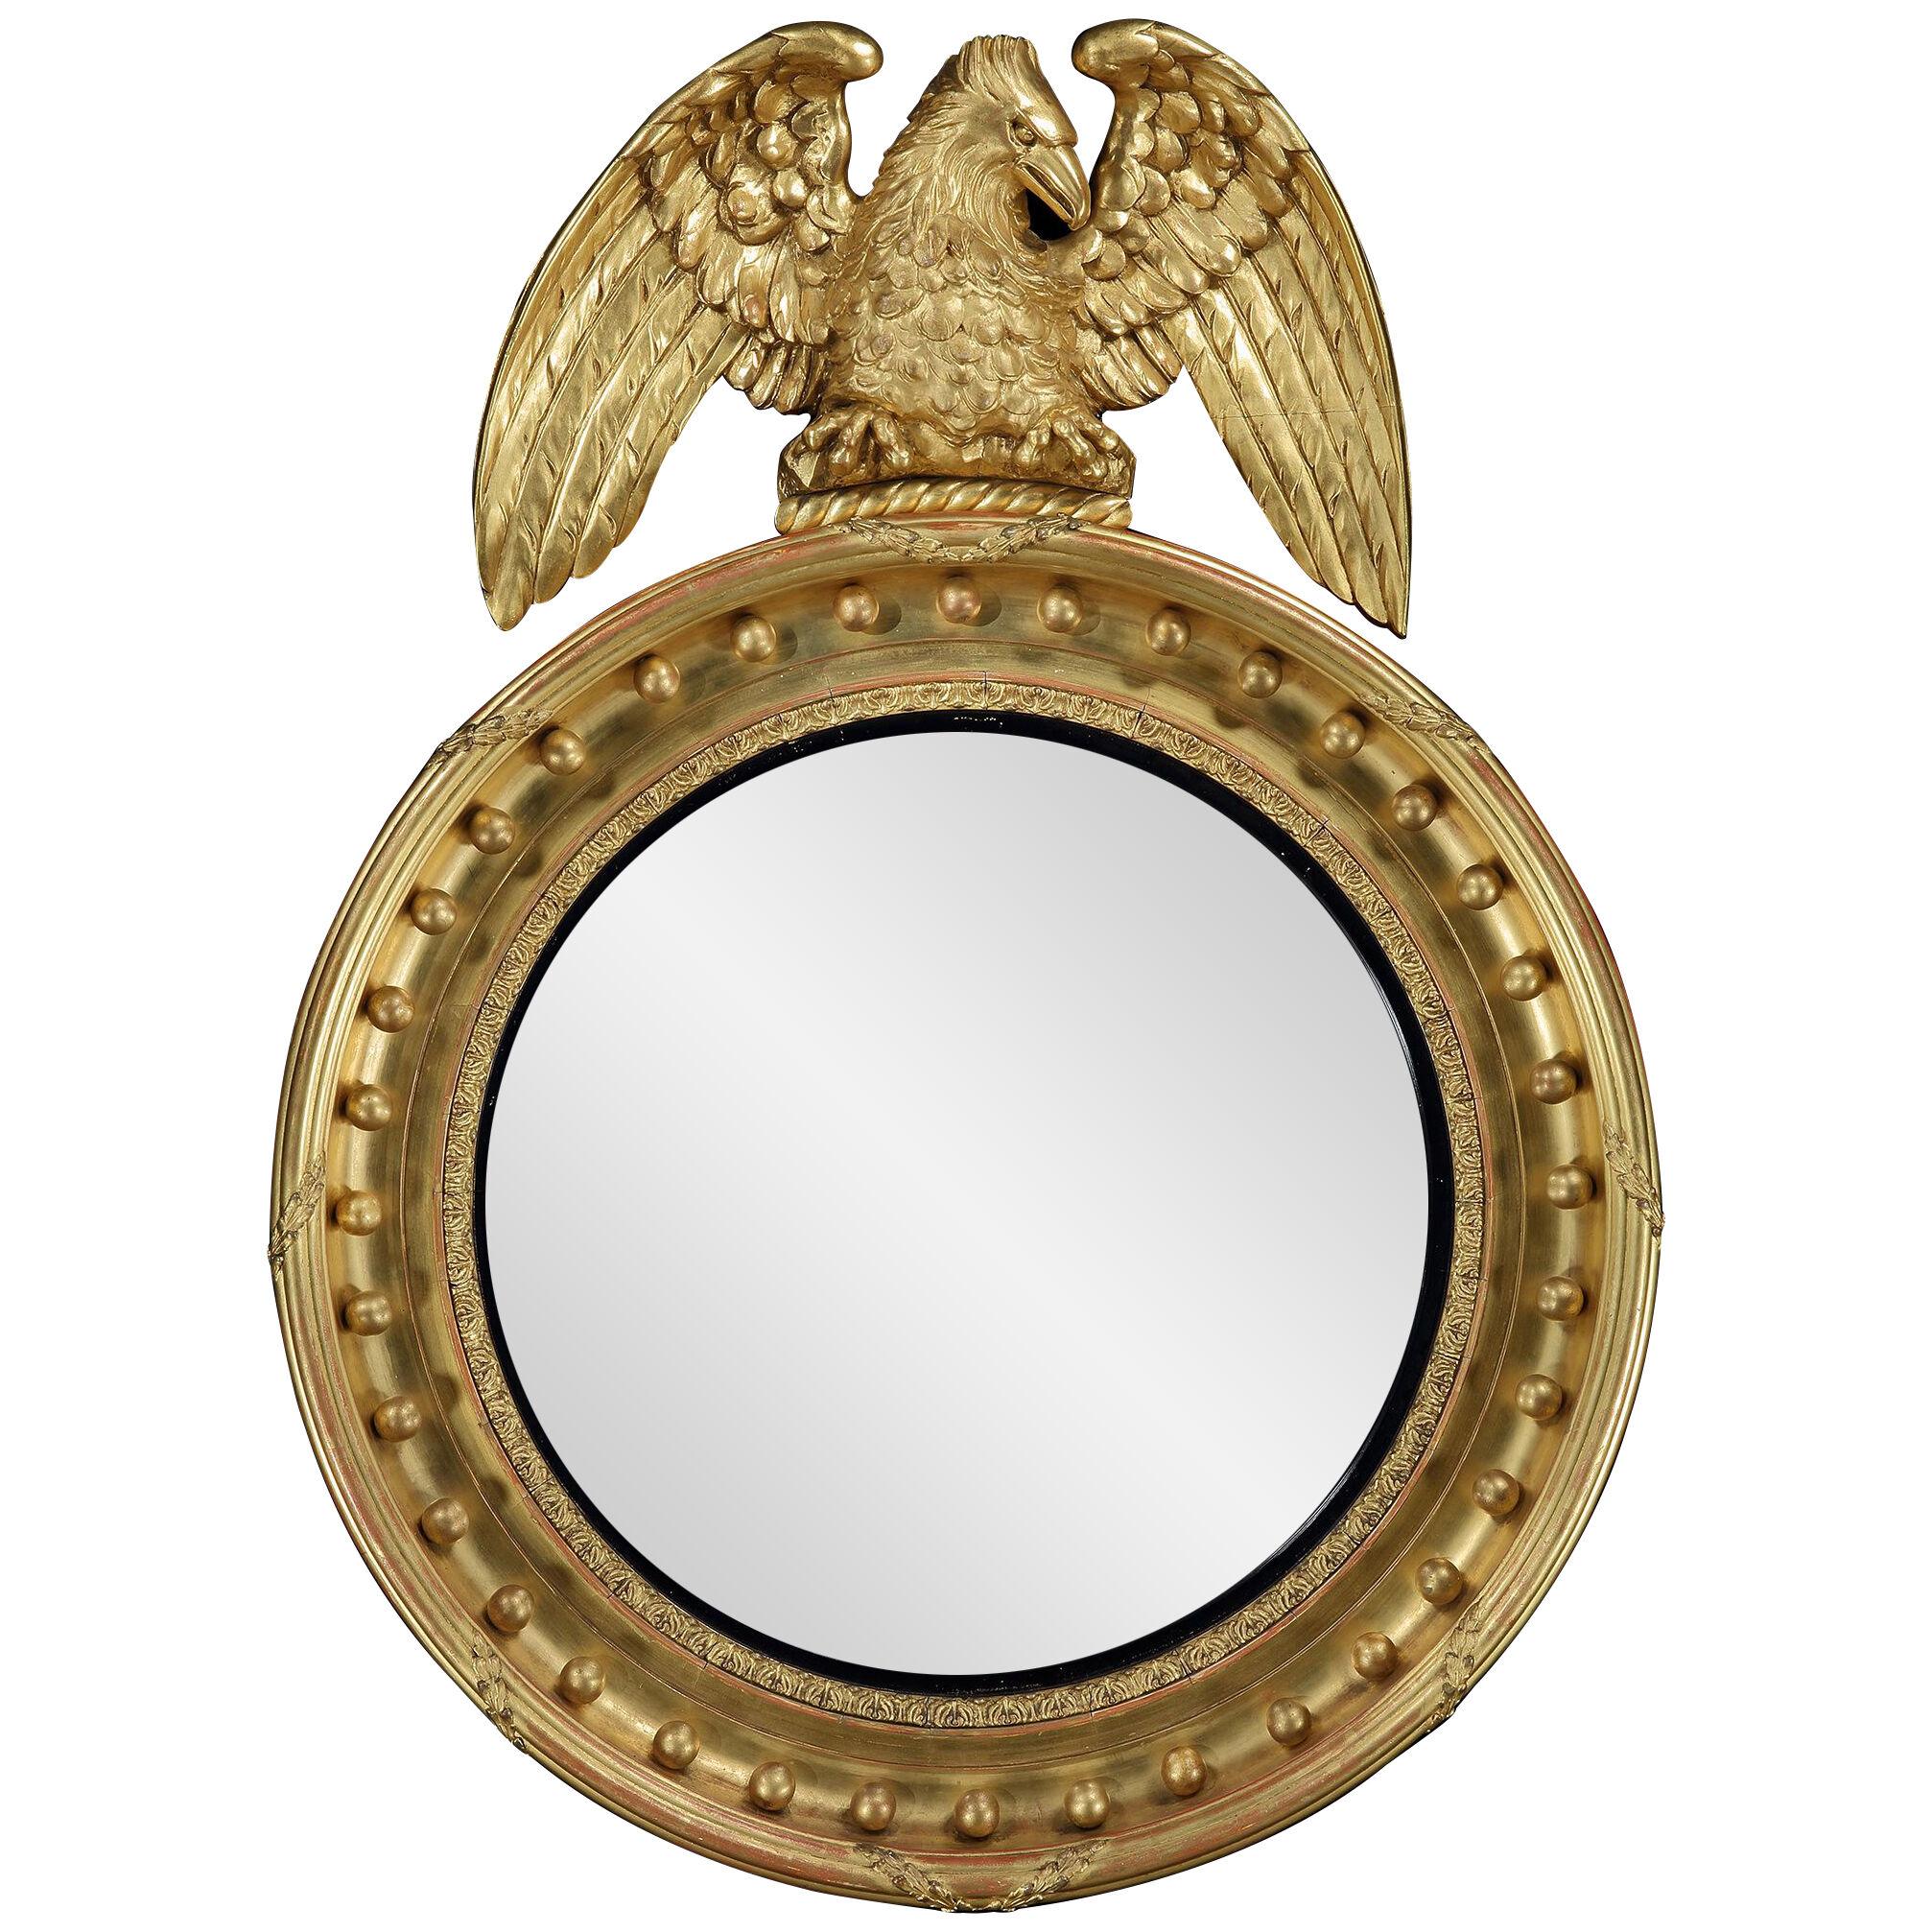 Regency Period Convex Mirror with Carved Eagle Crest